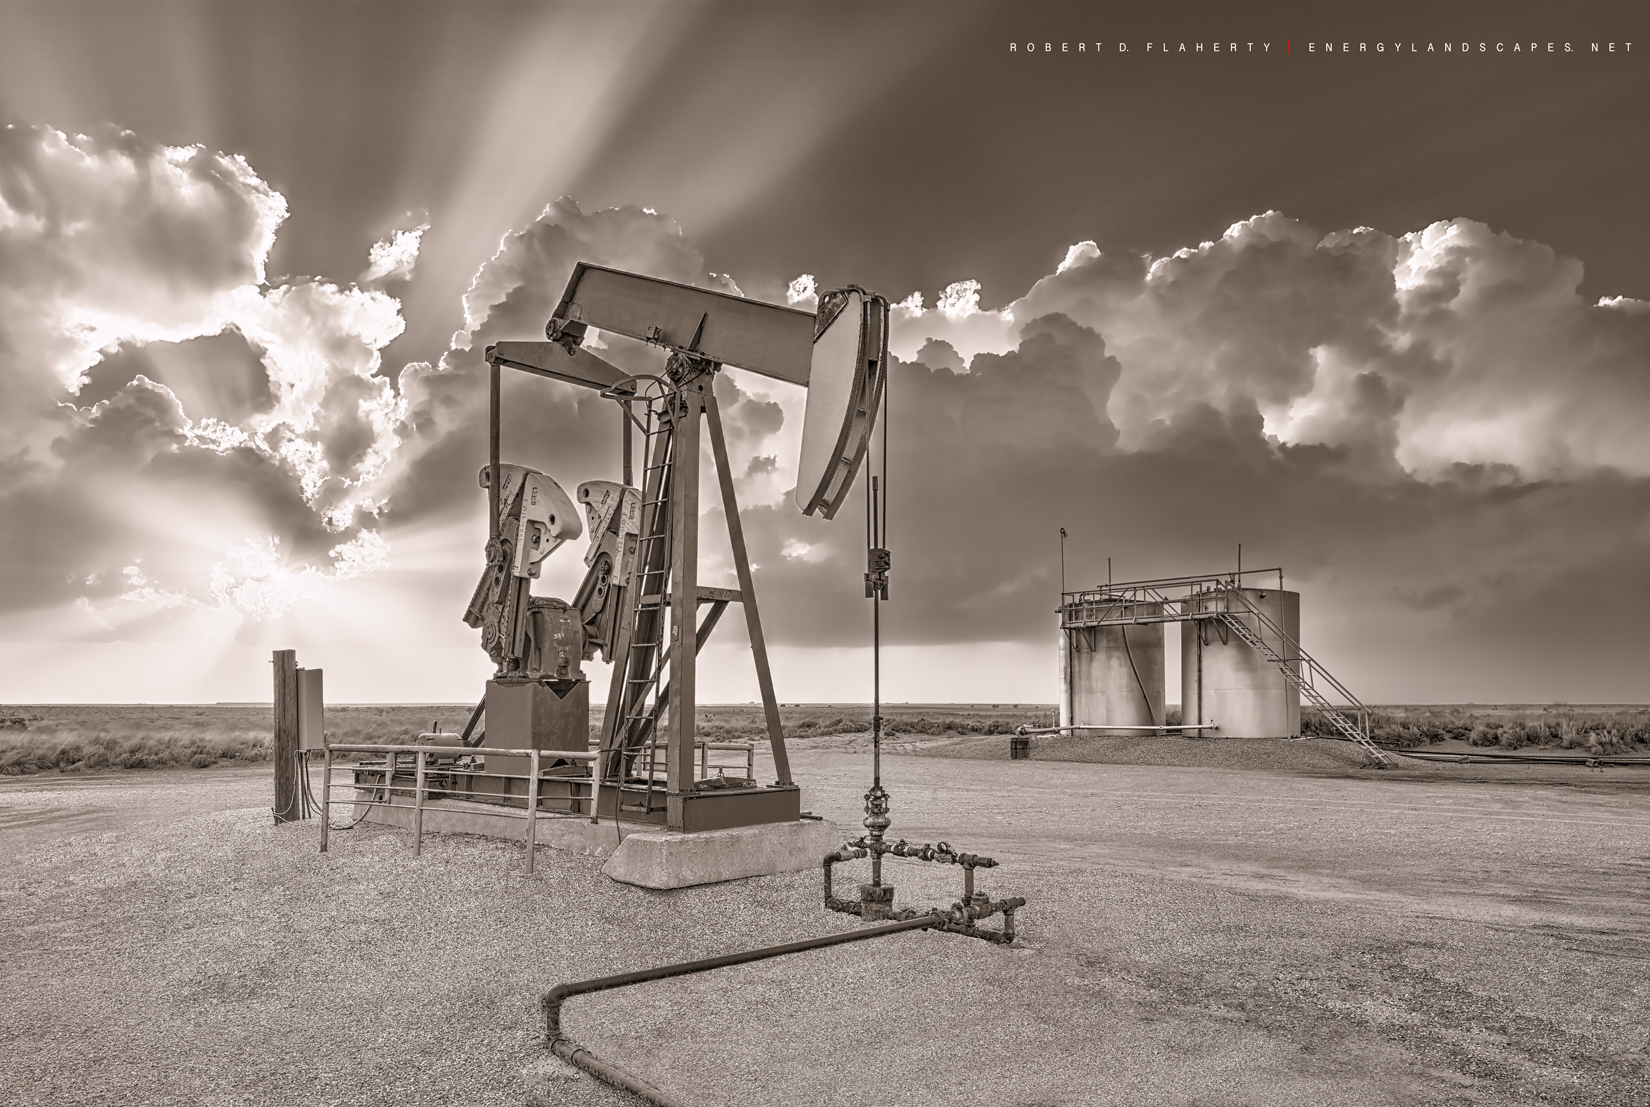 The Best Of Whats Around I Sepia features a pump jack and battery on an old stripper well on the open plains Northwest of Denver...